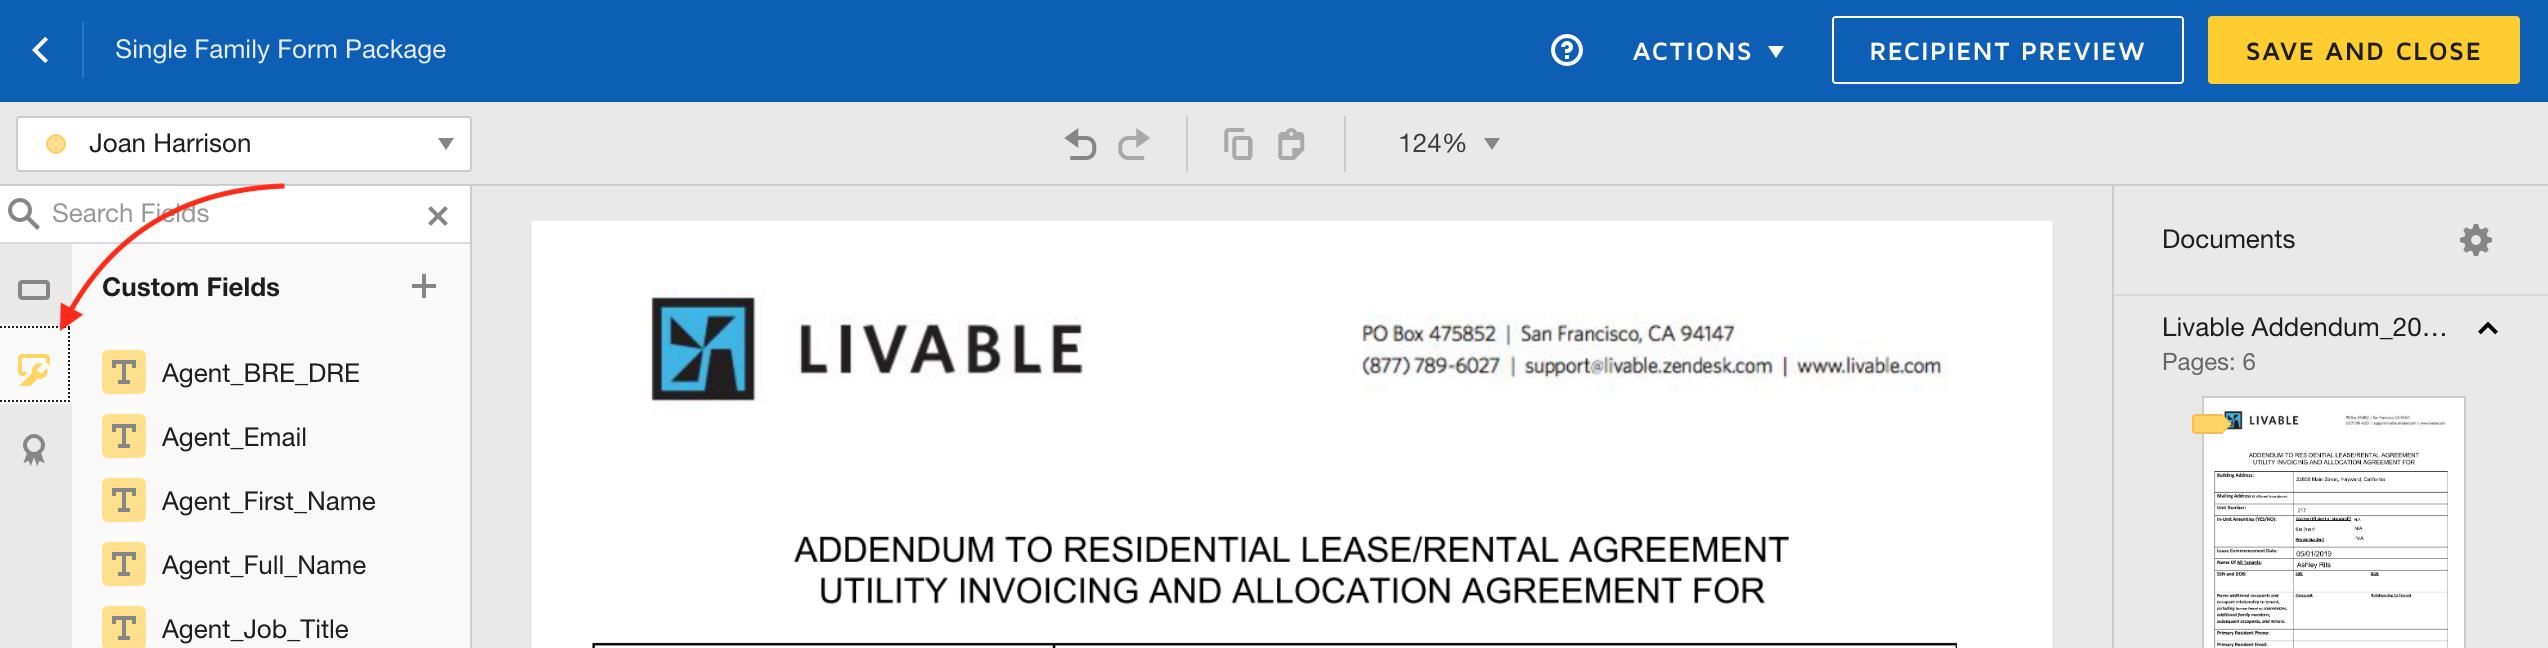 docusign-for-lease-signing-intellirent